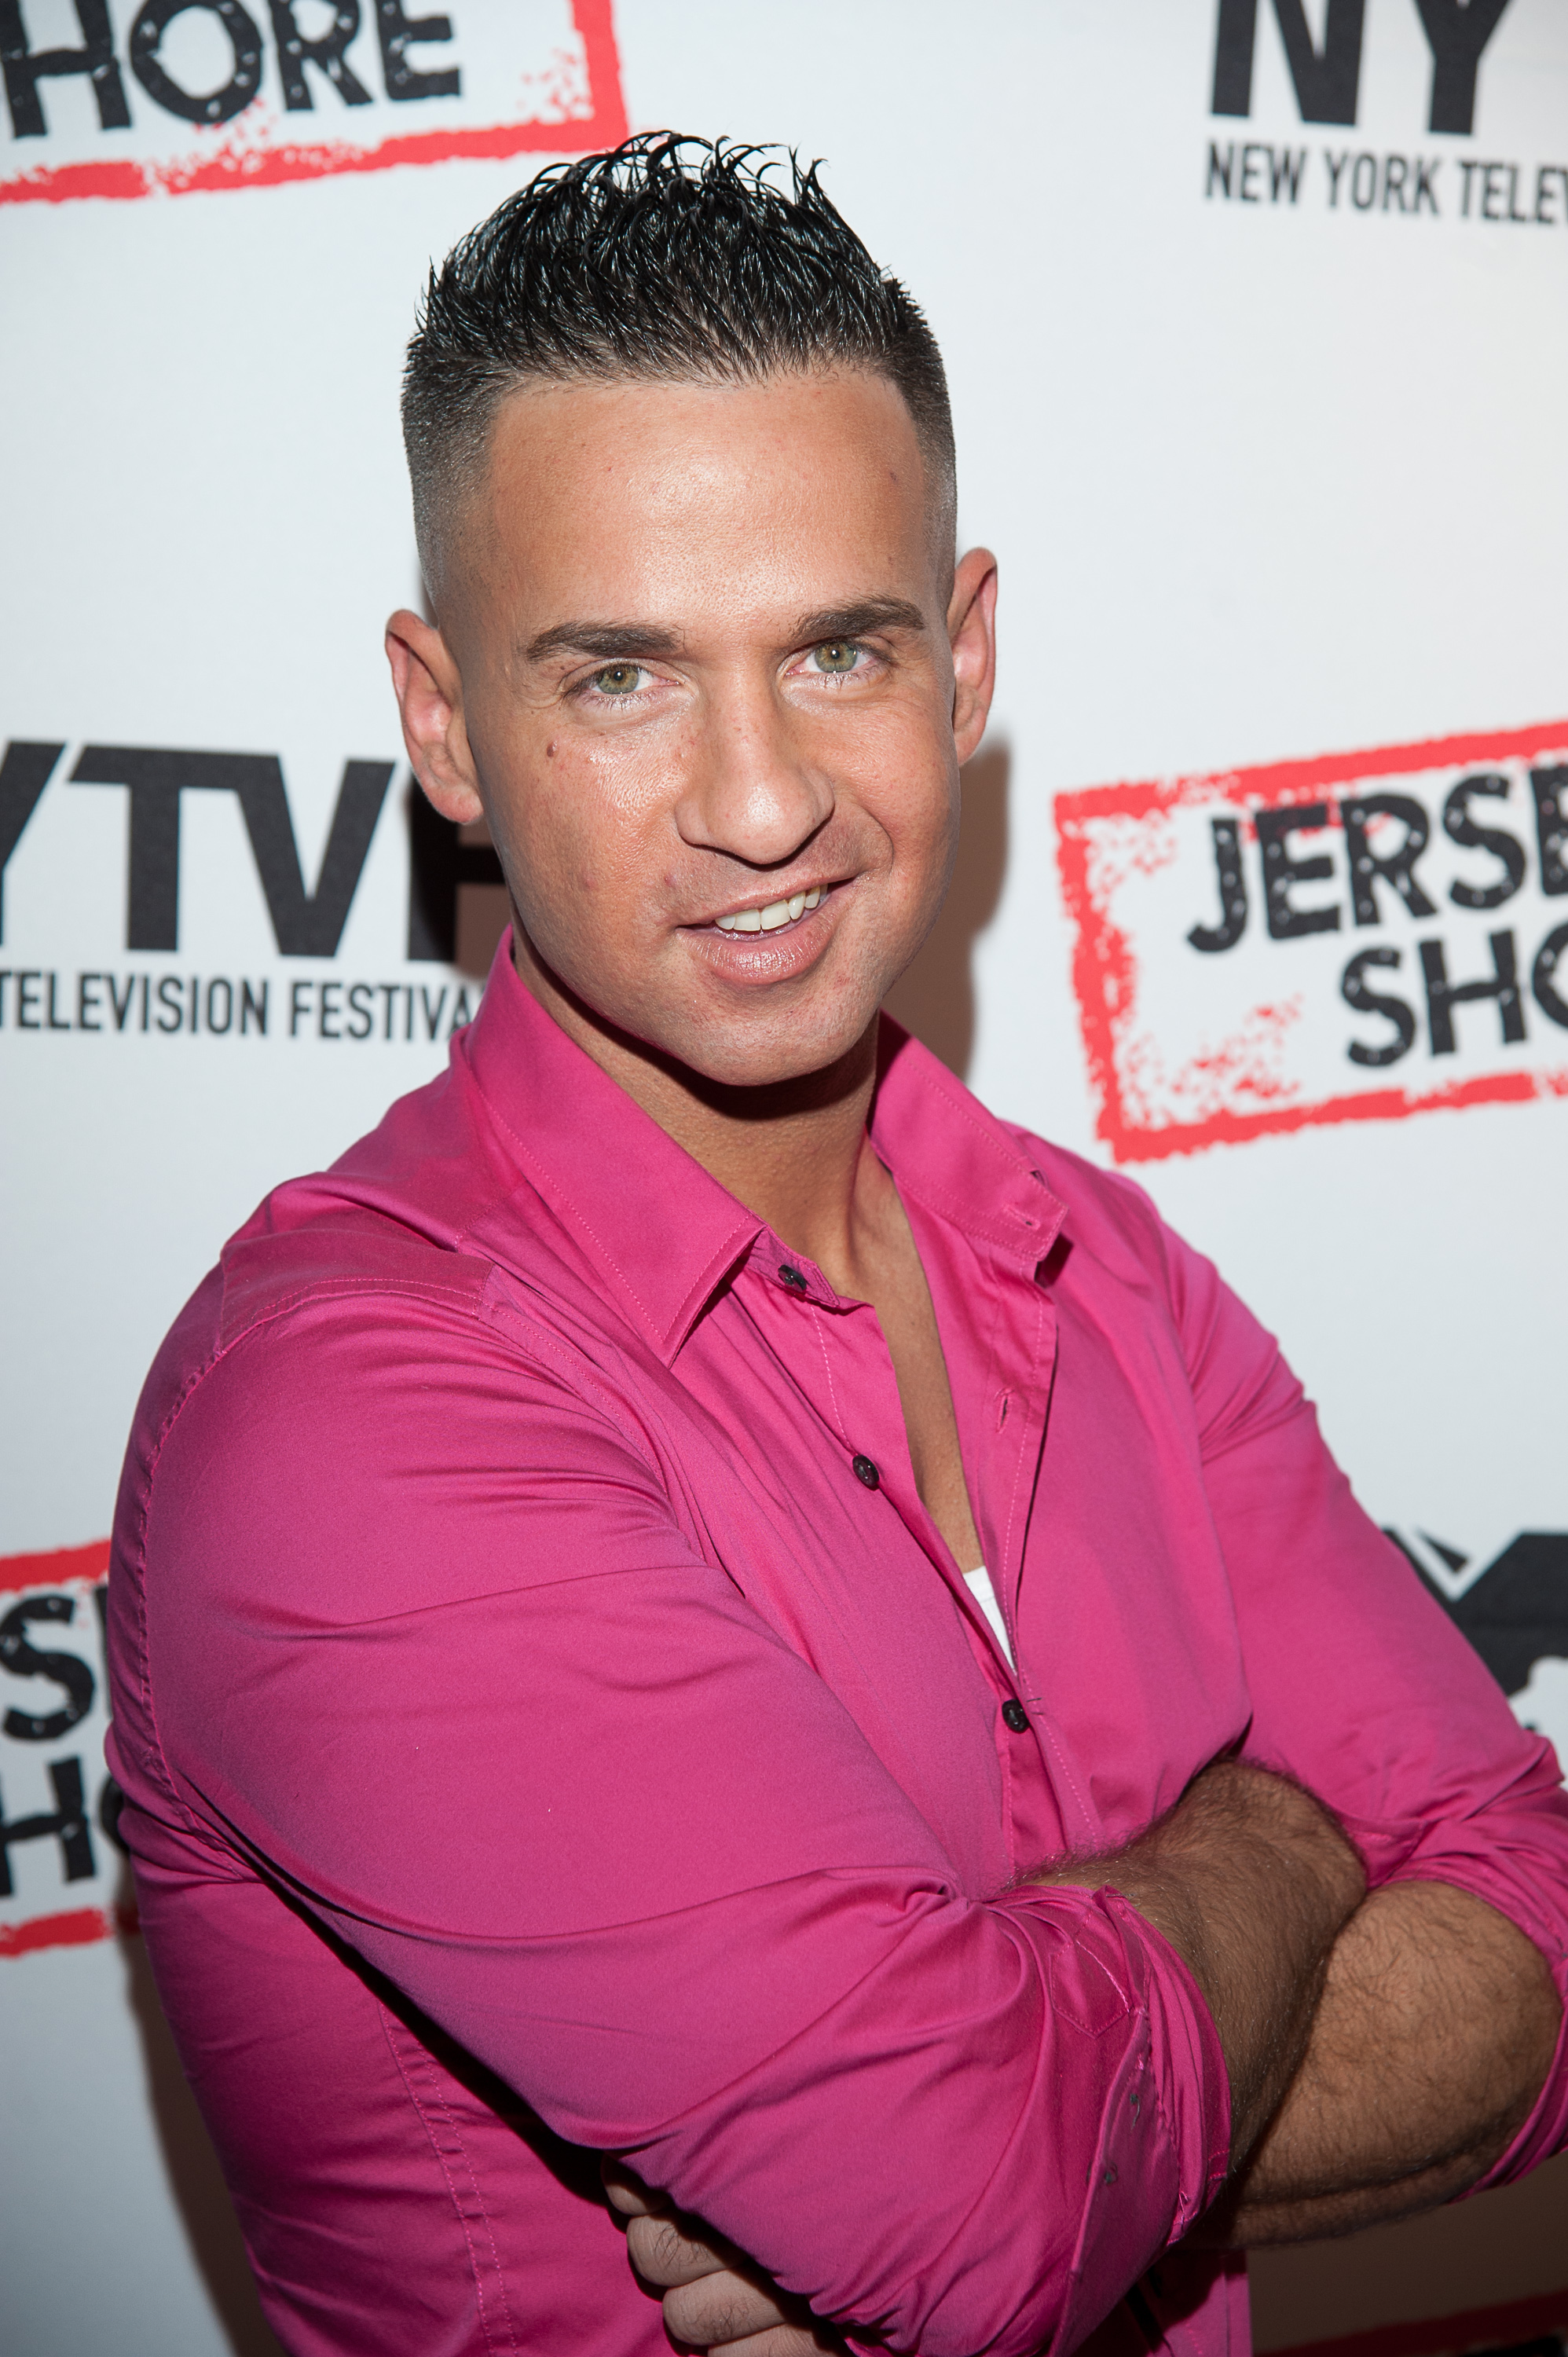 The Situation Jersey Shore: Michael Sorrentino Faces Tax Charges ...